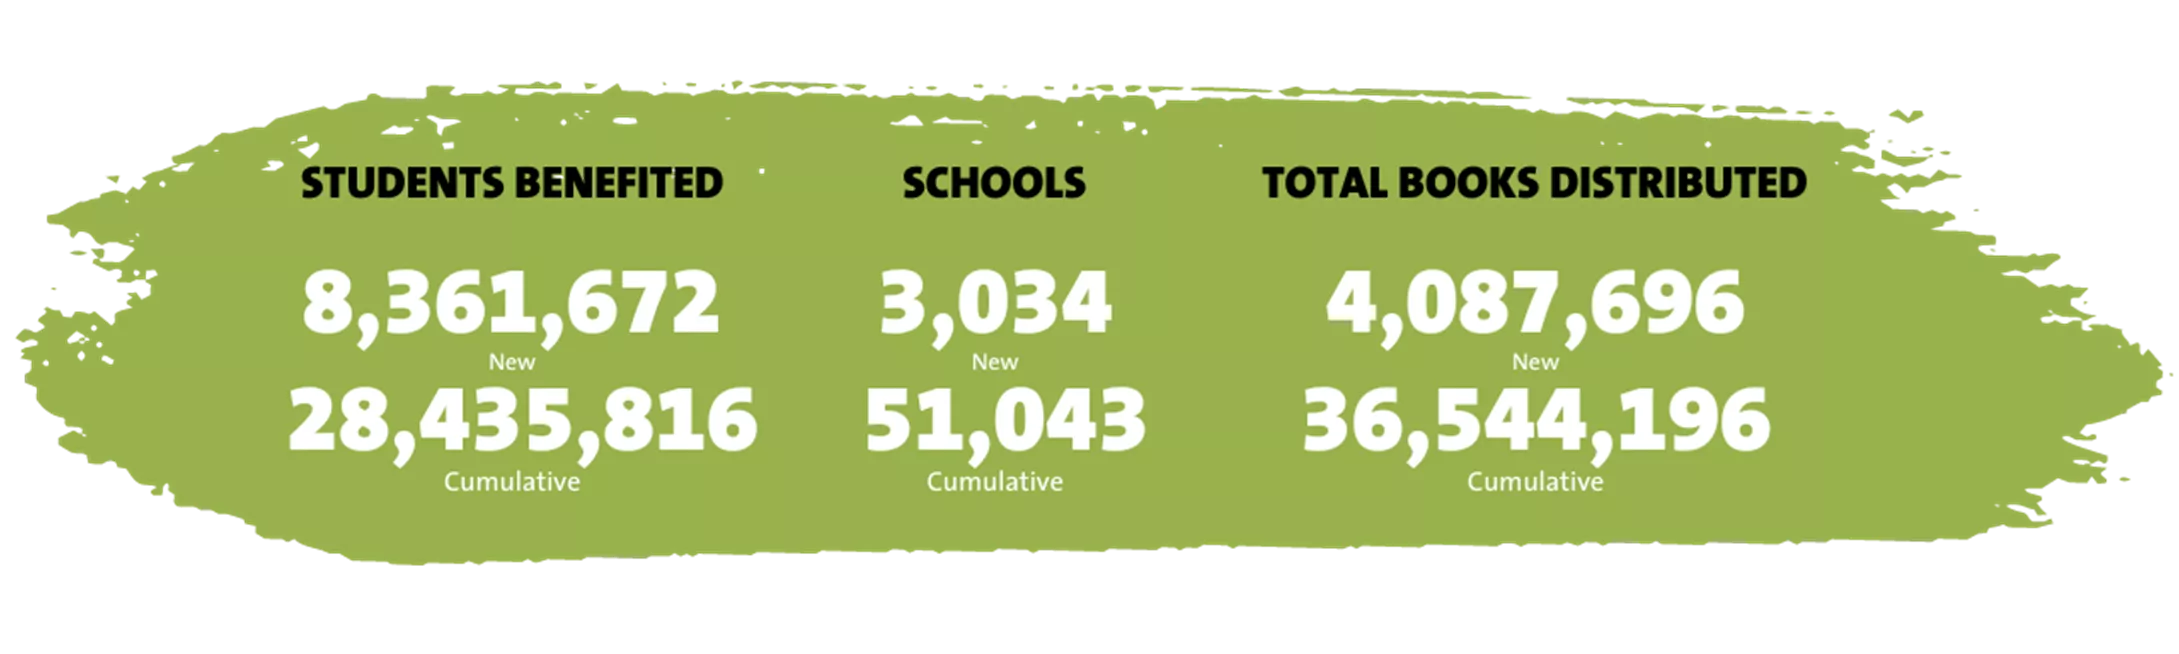 Green paint background with text overlay that reads "Students Benefited: 8,261,672 New and 28,435,816 Cumulative" and "Schools: 3,034 New and 51,043 Cumulative" and "Total Books Distributed: 4,087,696 New and 36,544,196 Cumulative"